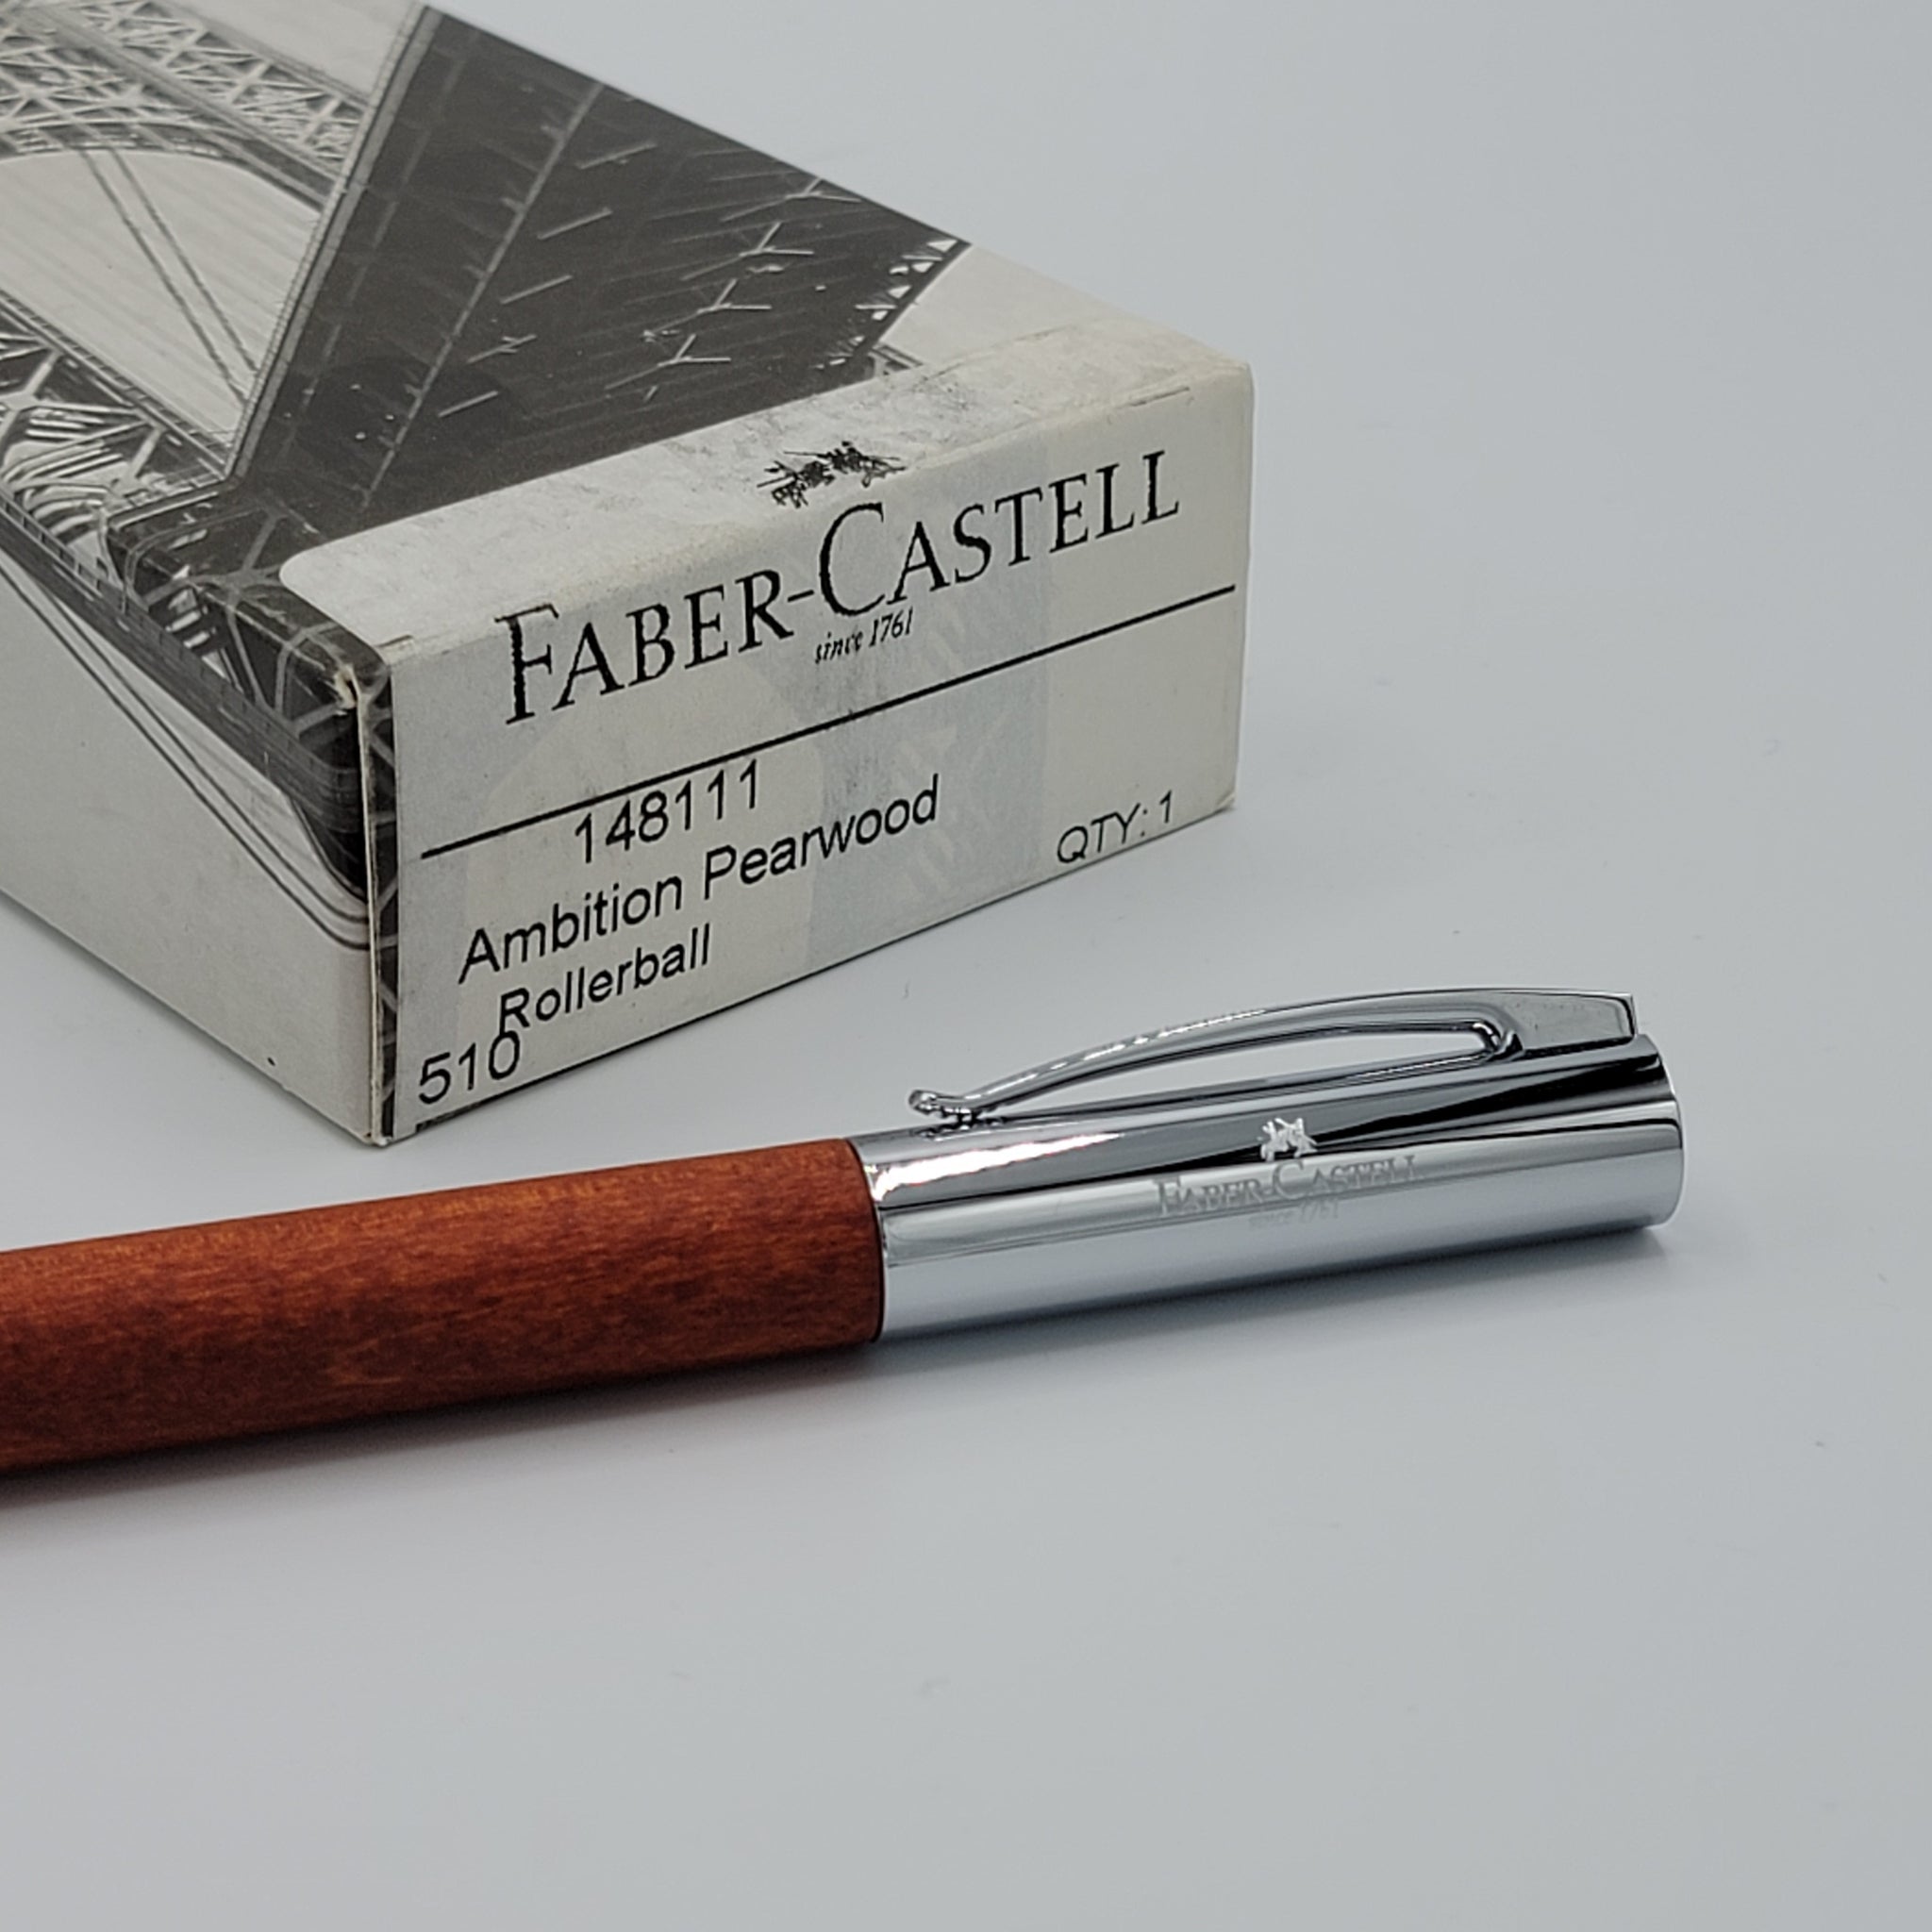 Faber Castell Faber Castell Ambition Pearwood Rollerball Pen freeshipping - RiNo Distribution